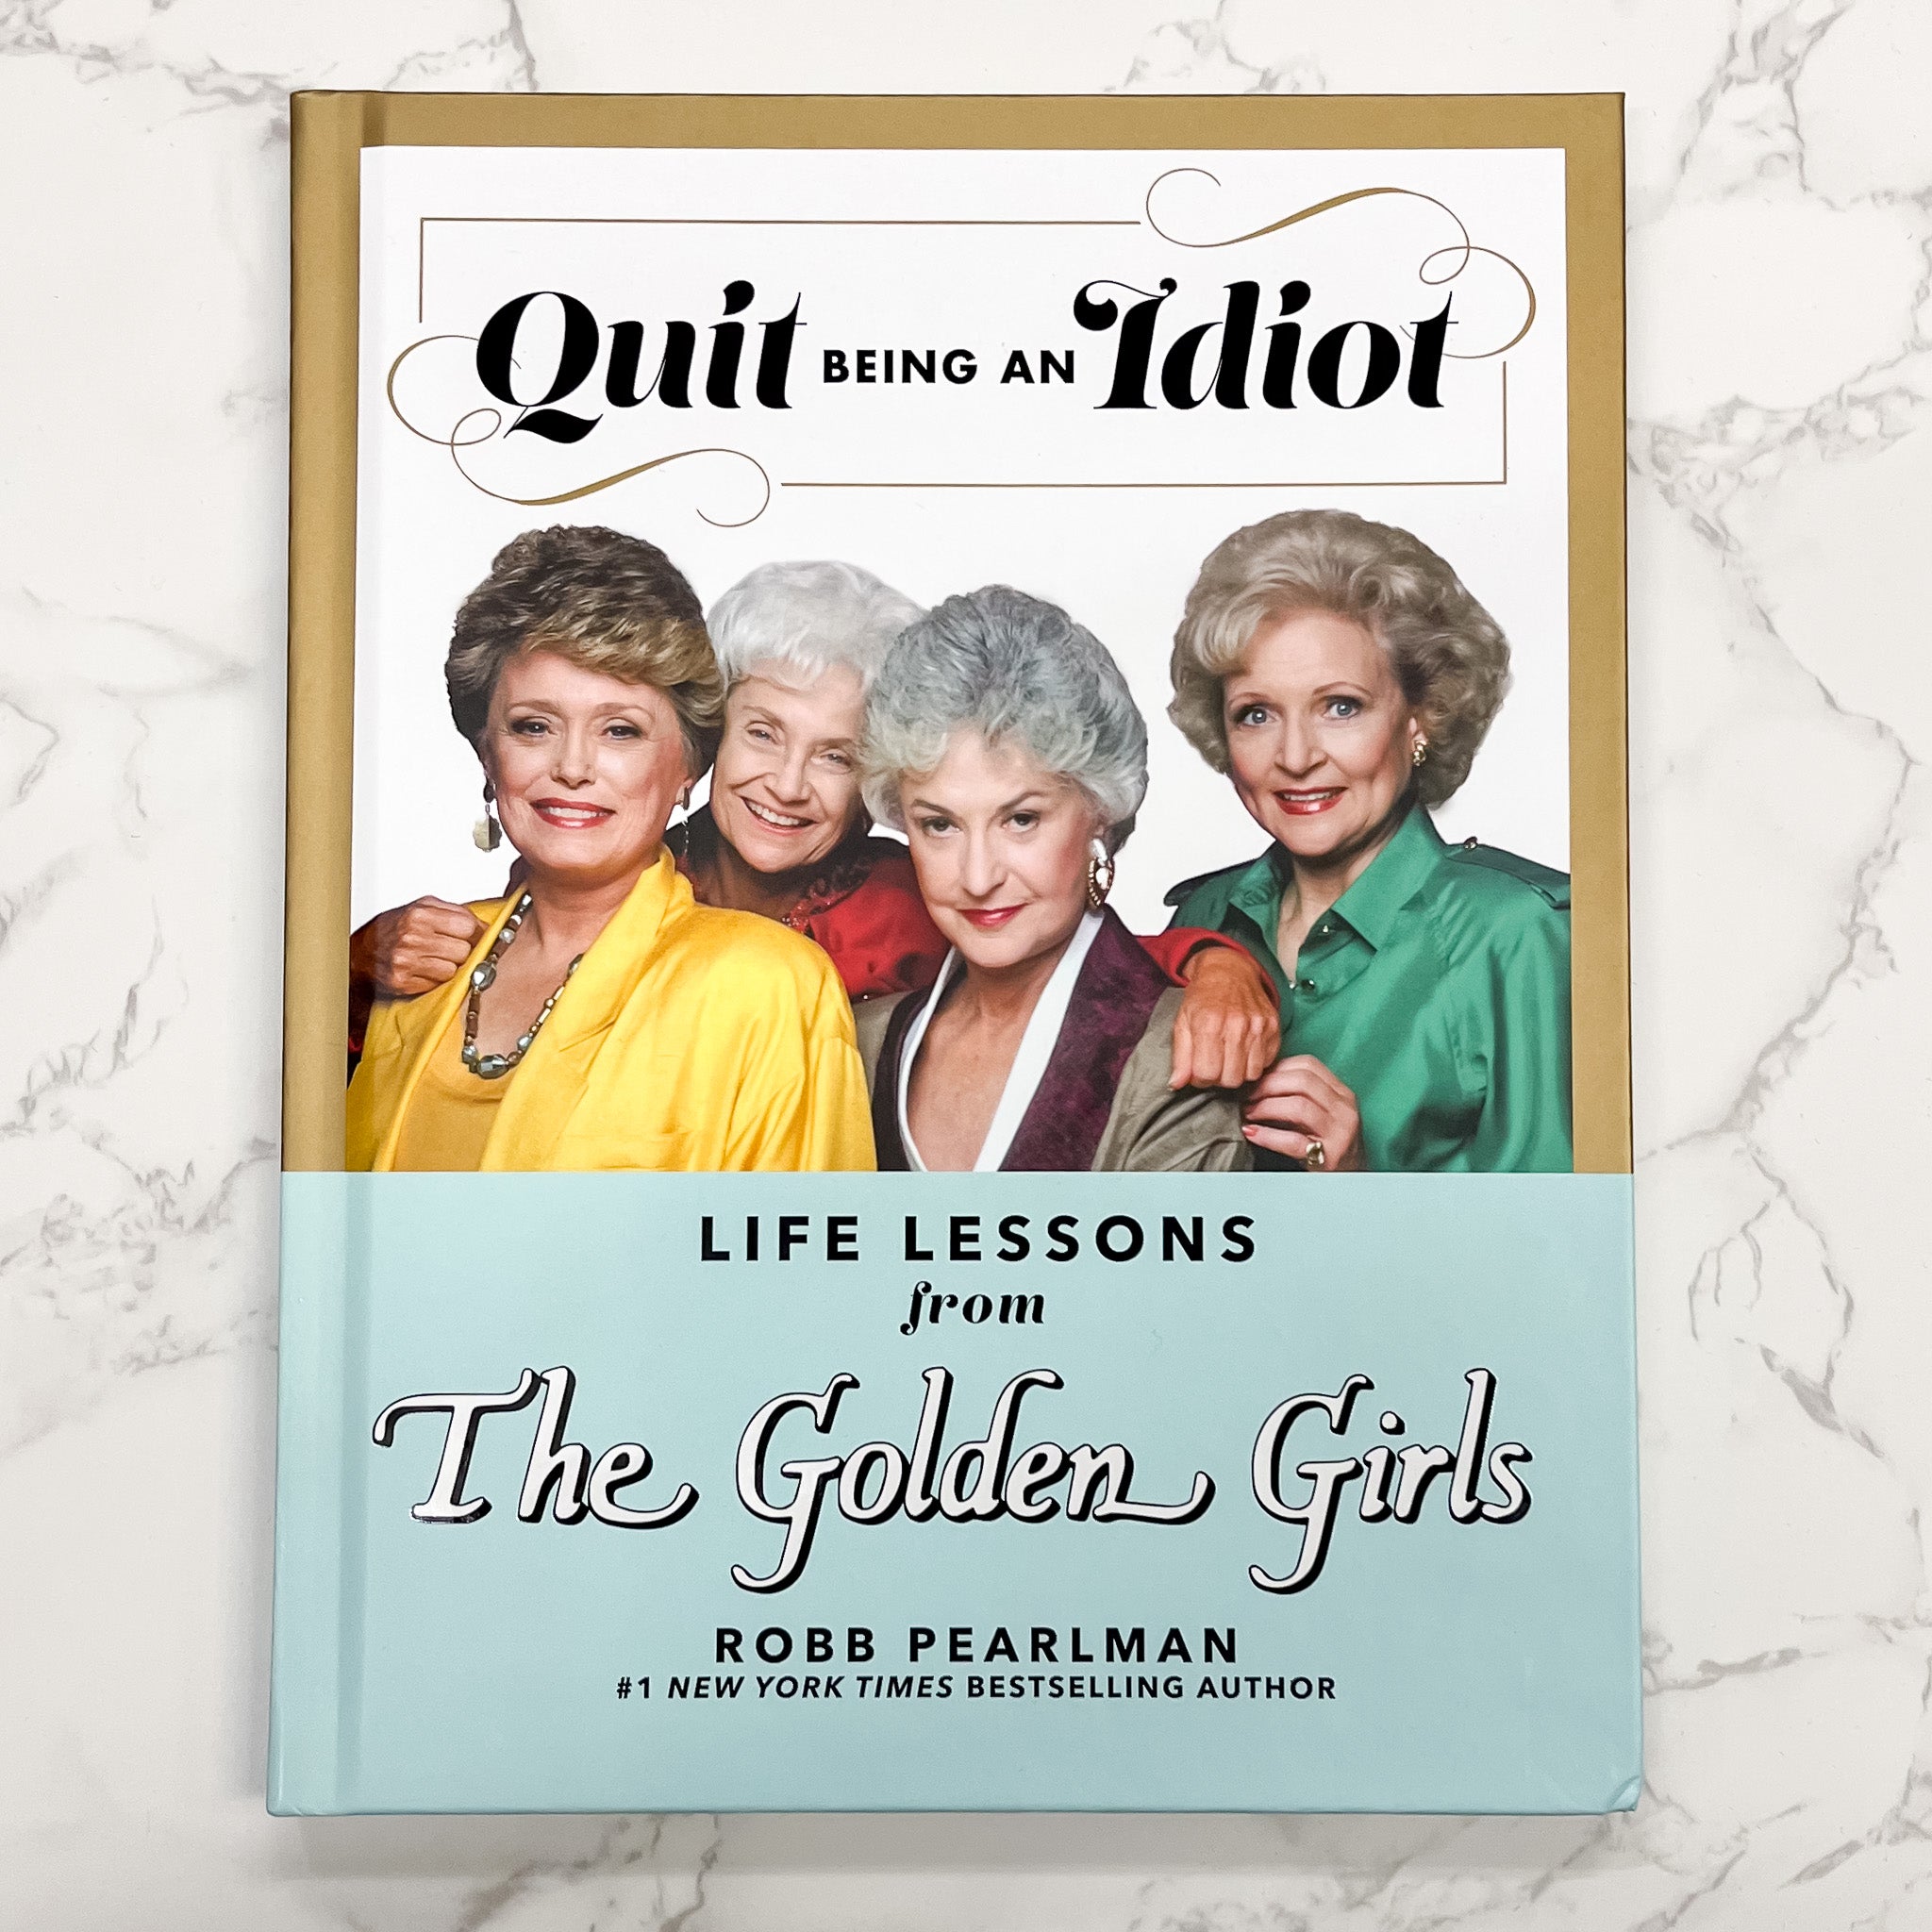 The Golden Girls Cookbook: Cheesecakes and Cocktails!: Desserts and Drinks  to Enjoy on the Lanai with Blanche, Rose, Dorothy, and Sophia